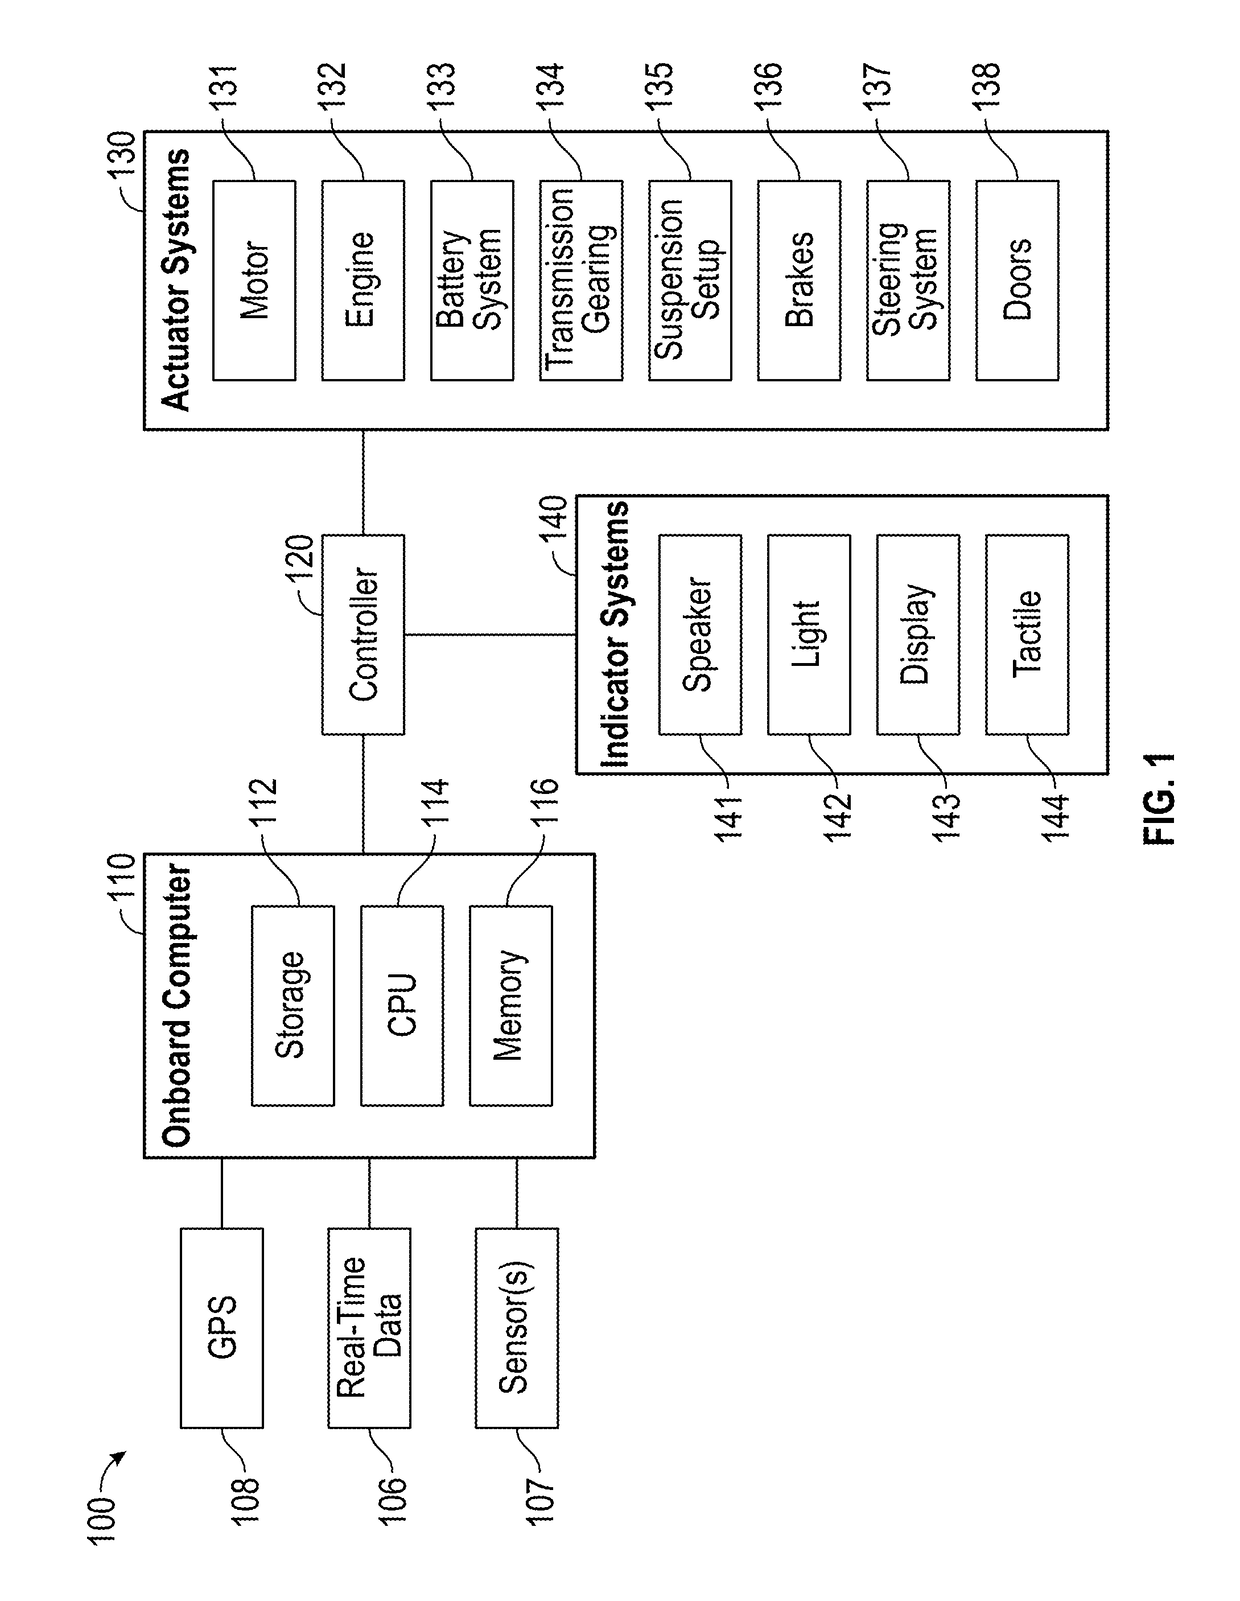 System and method for scheduling vehicle maintenance services